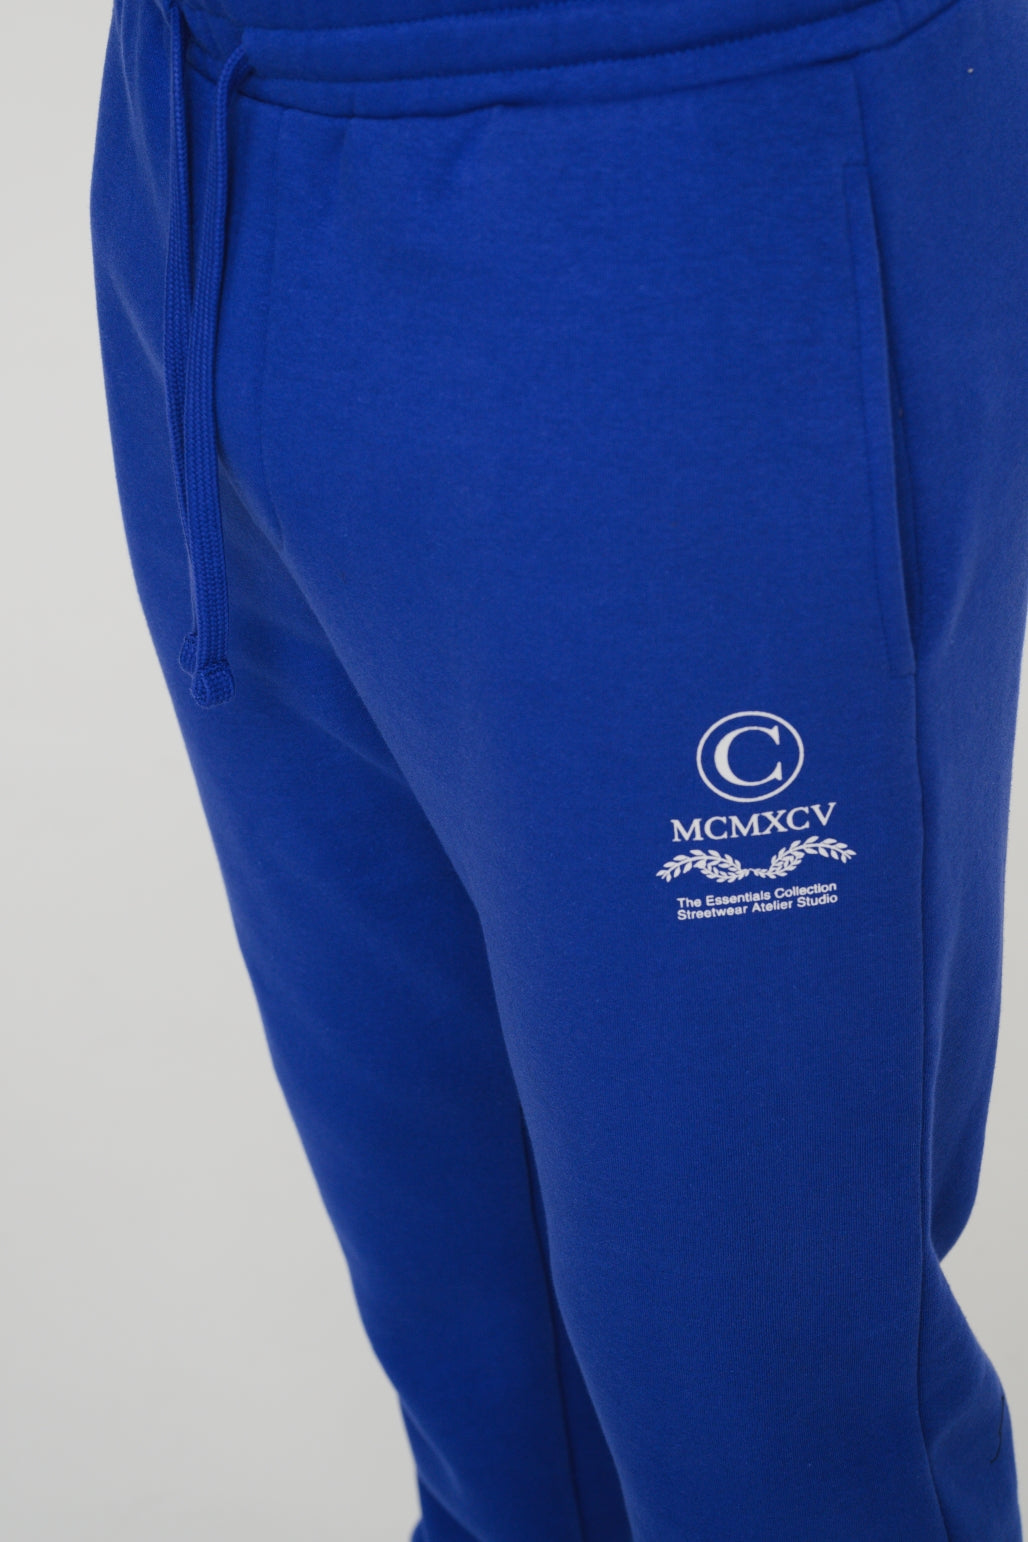 CABLE JOGGER - BLUE